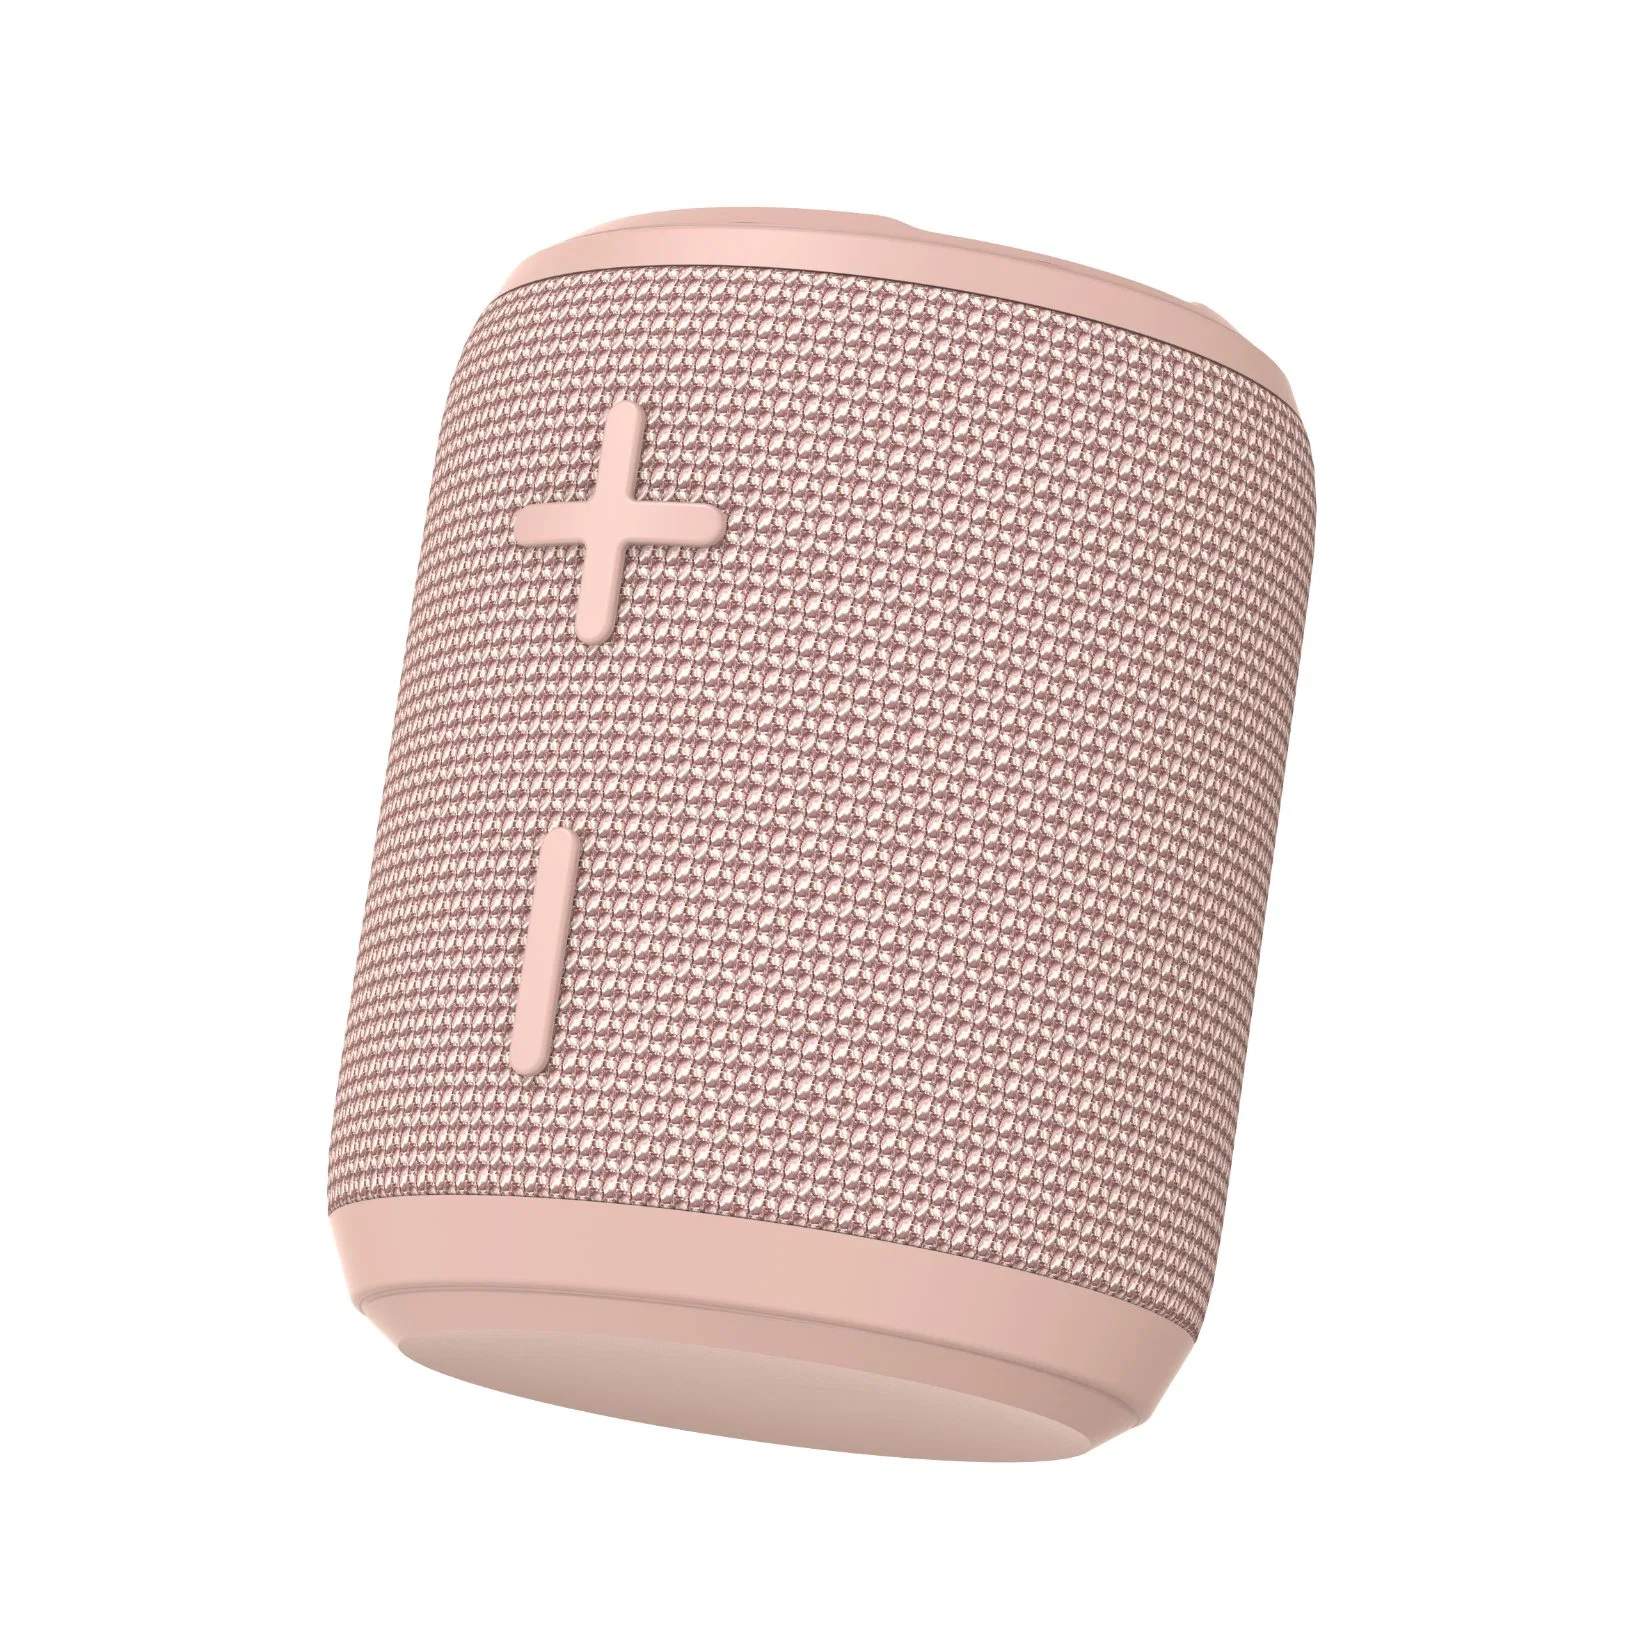 Ozzie E100 Mini Super Ably Wireless Bluetooth Speaker Subwoofer Portable Speakers with Retail Box Outdoor Mini Bluetooth Speaker